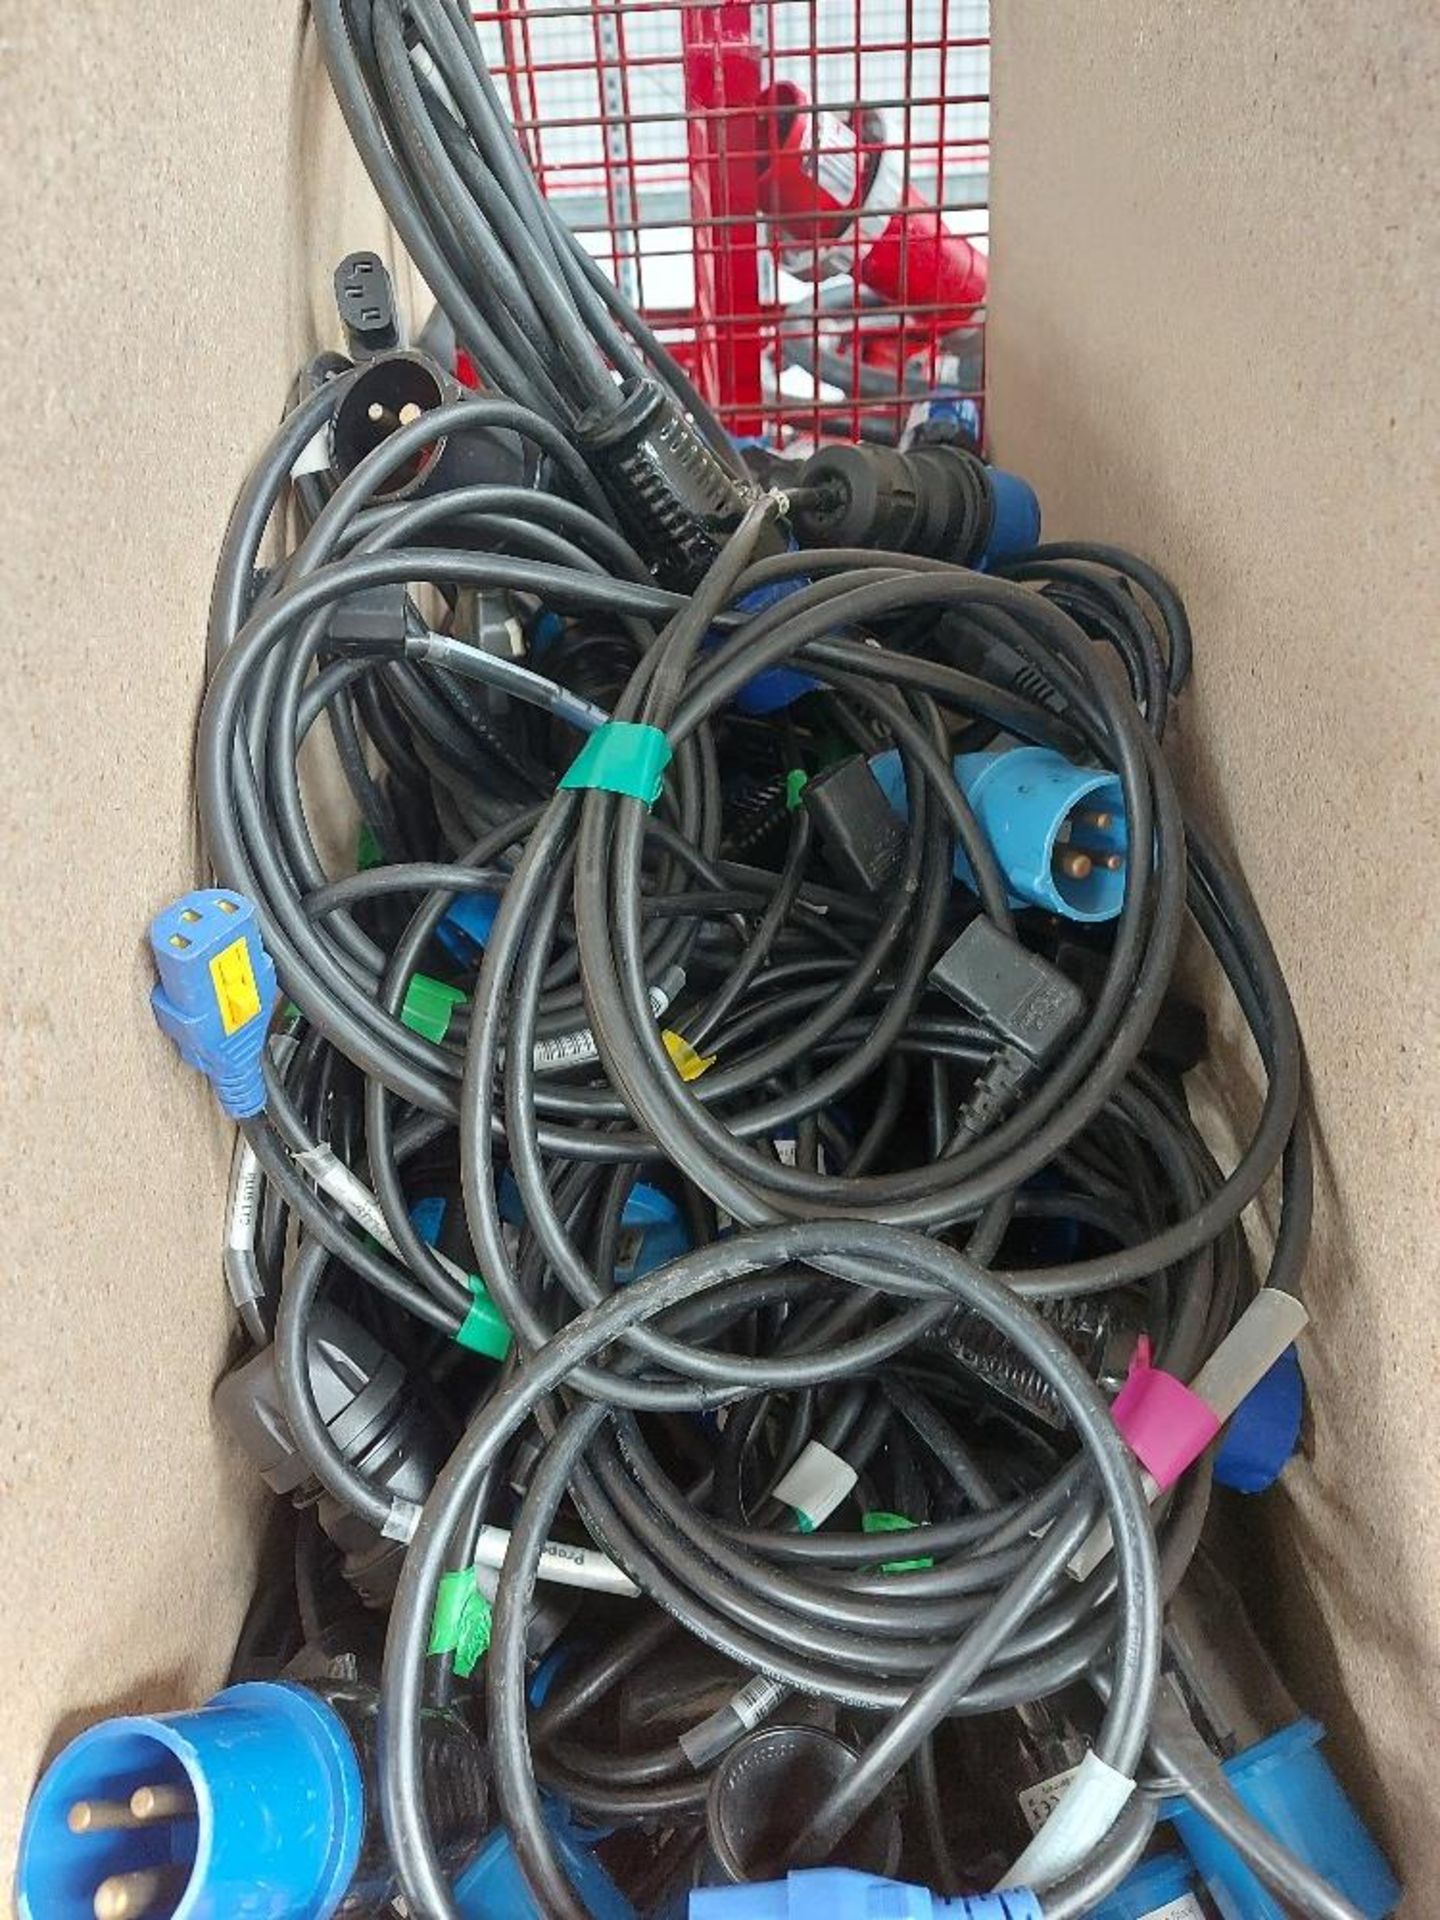 Large Quantity of Quick Connect 16-6h/200-250 3-Pin Cables With Large Qty of 2-Pin Power Cables - Bild 3 aus 5